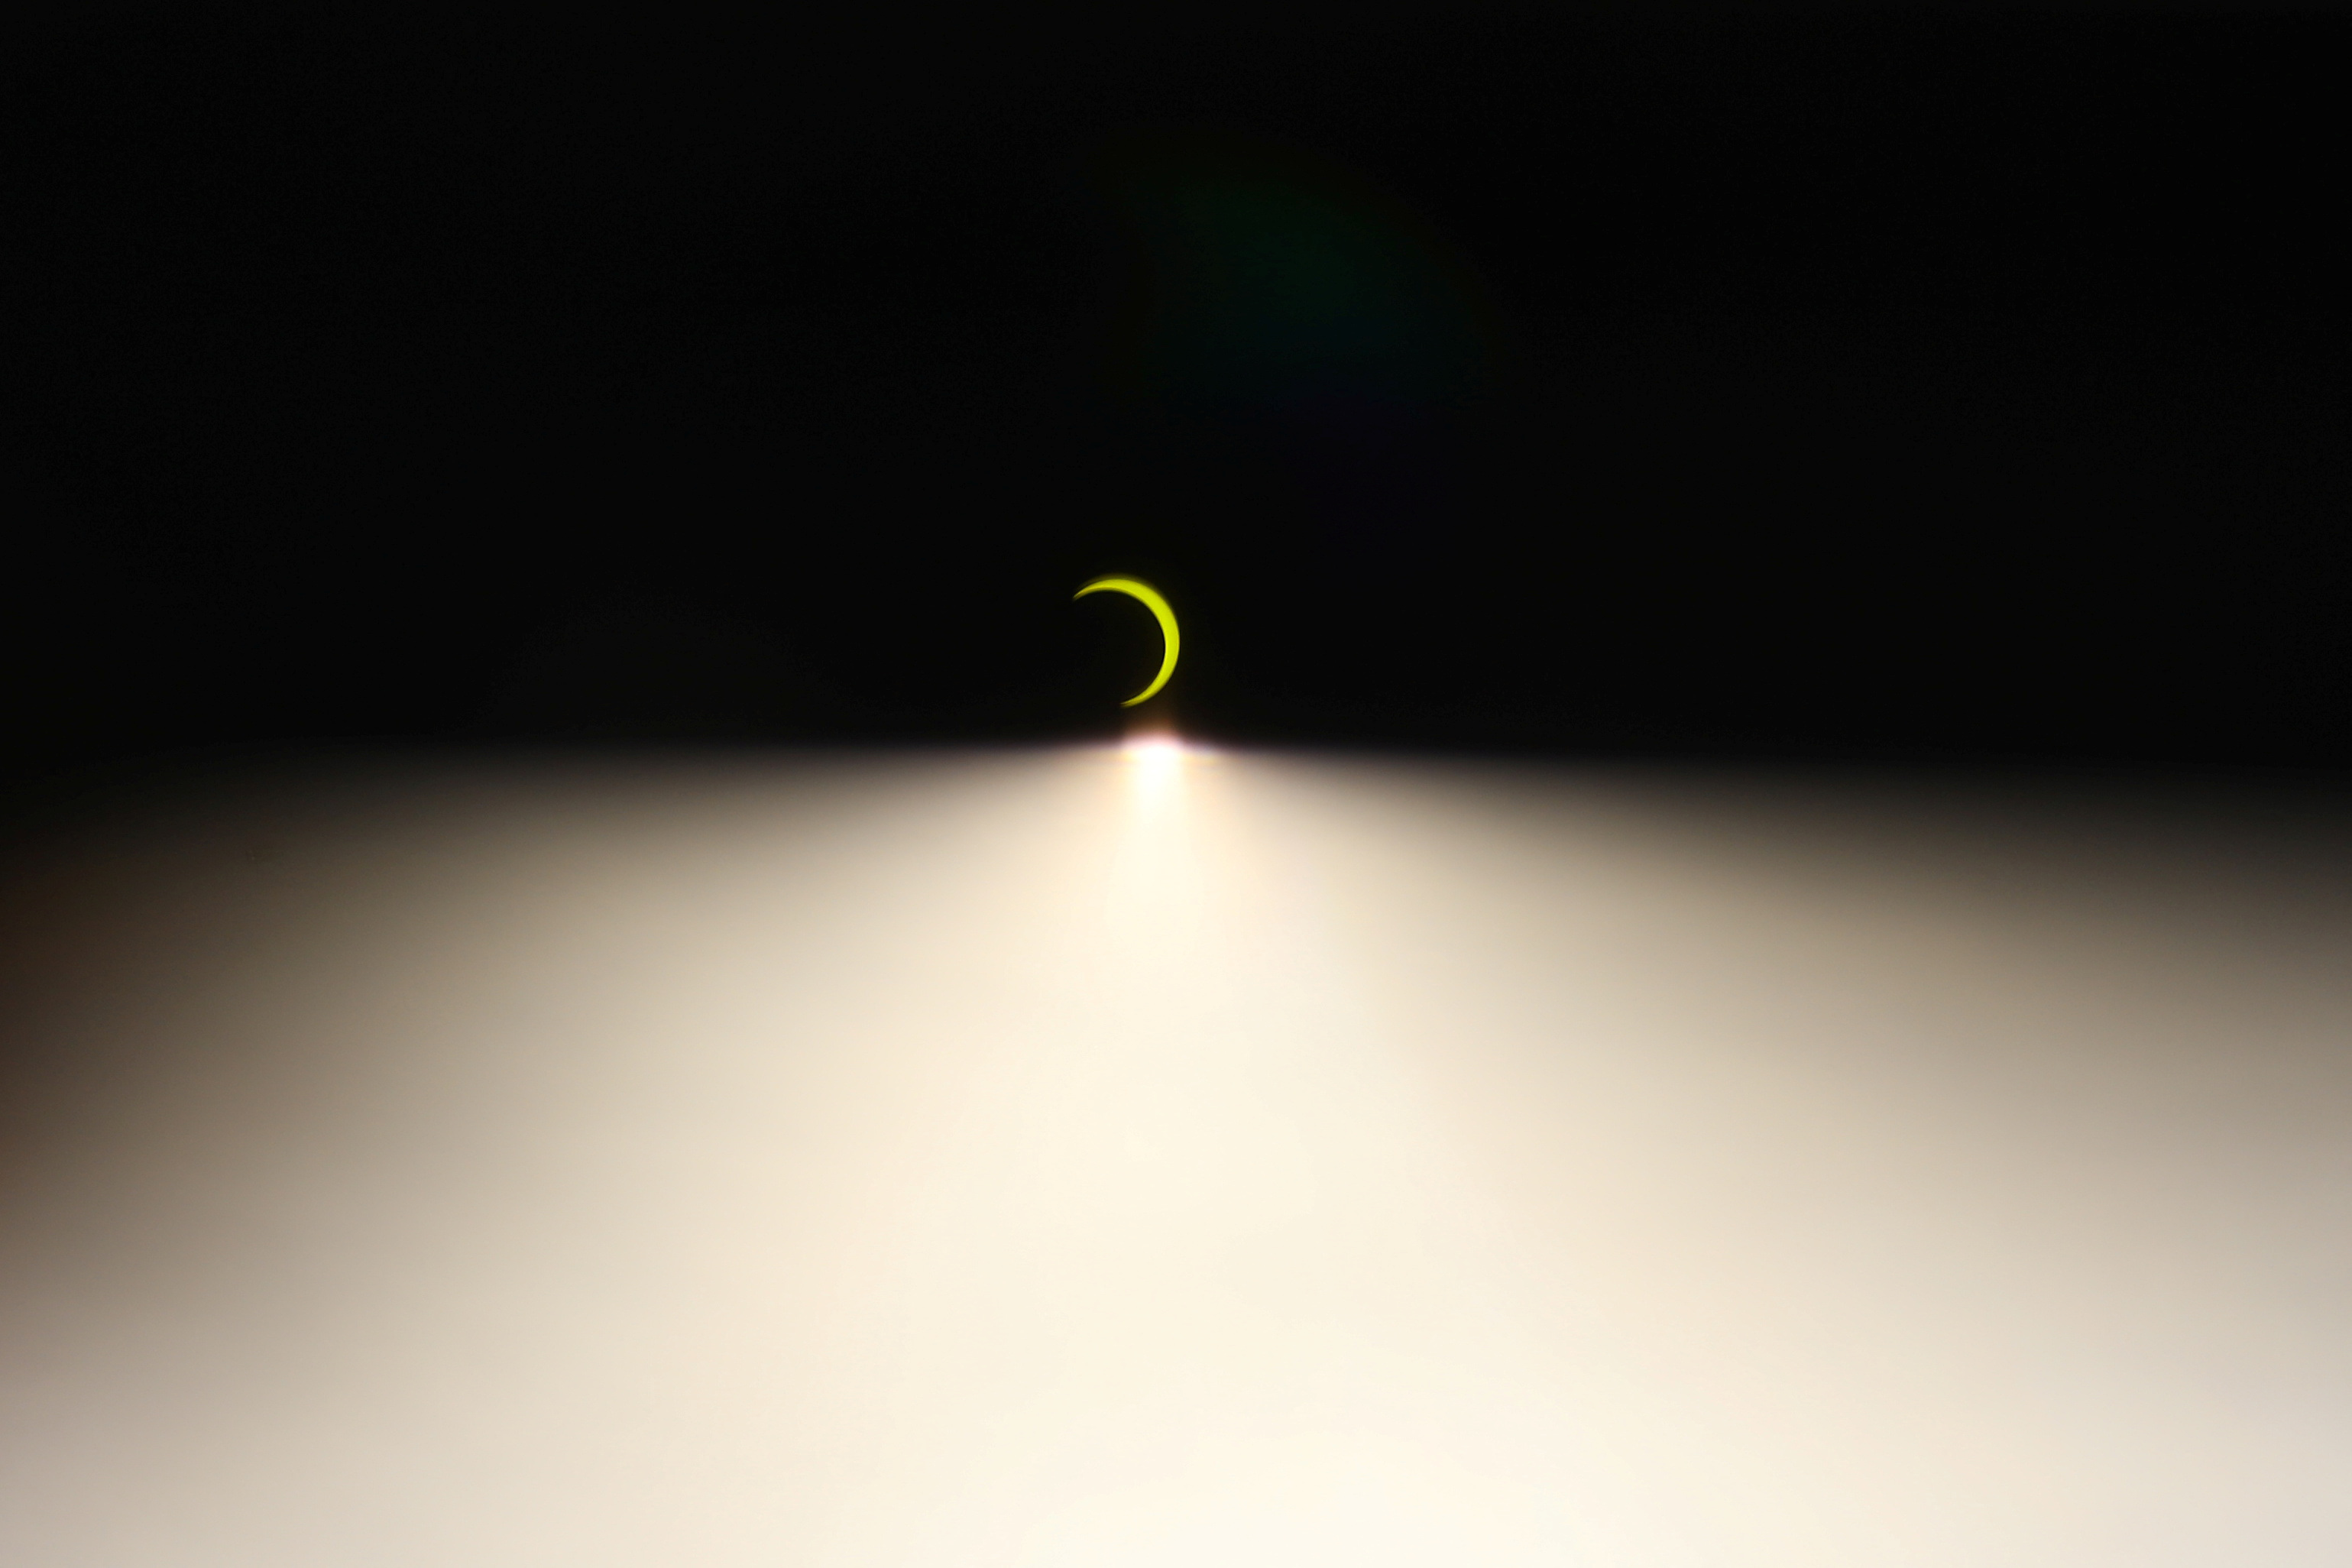 This image is imaginary and does not show the solar eclipse fr